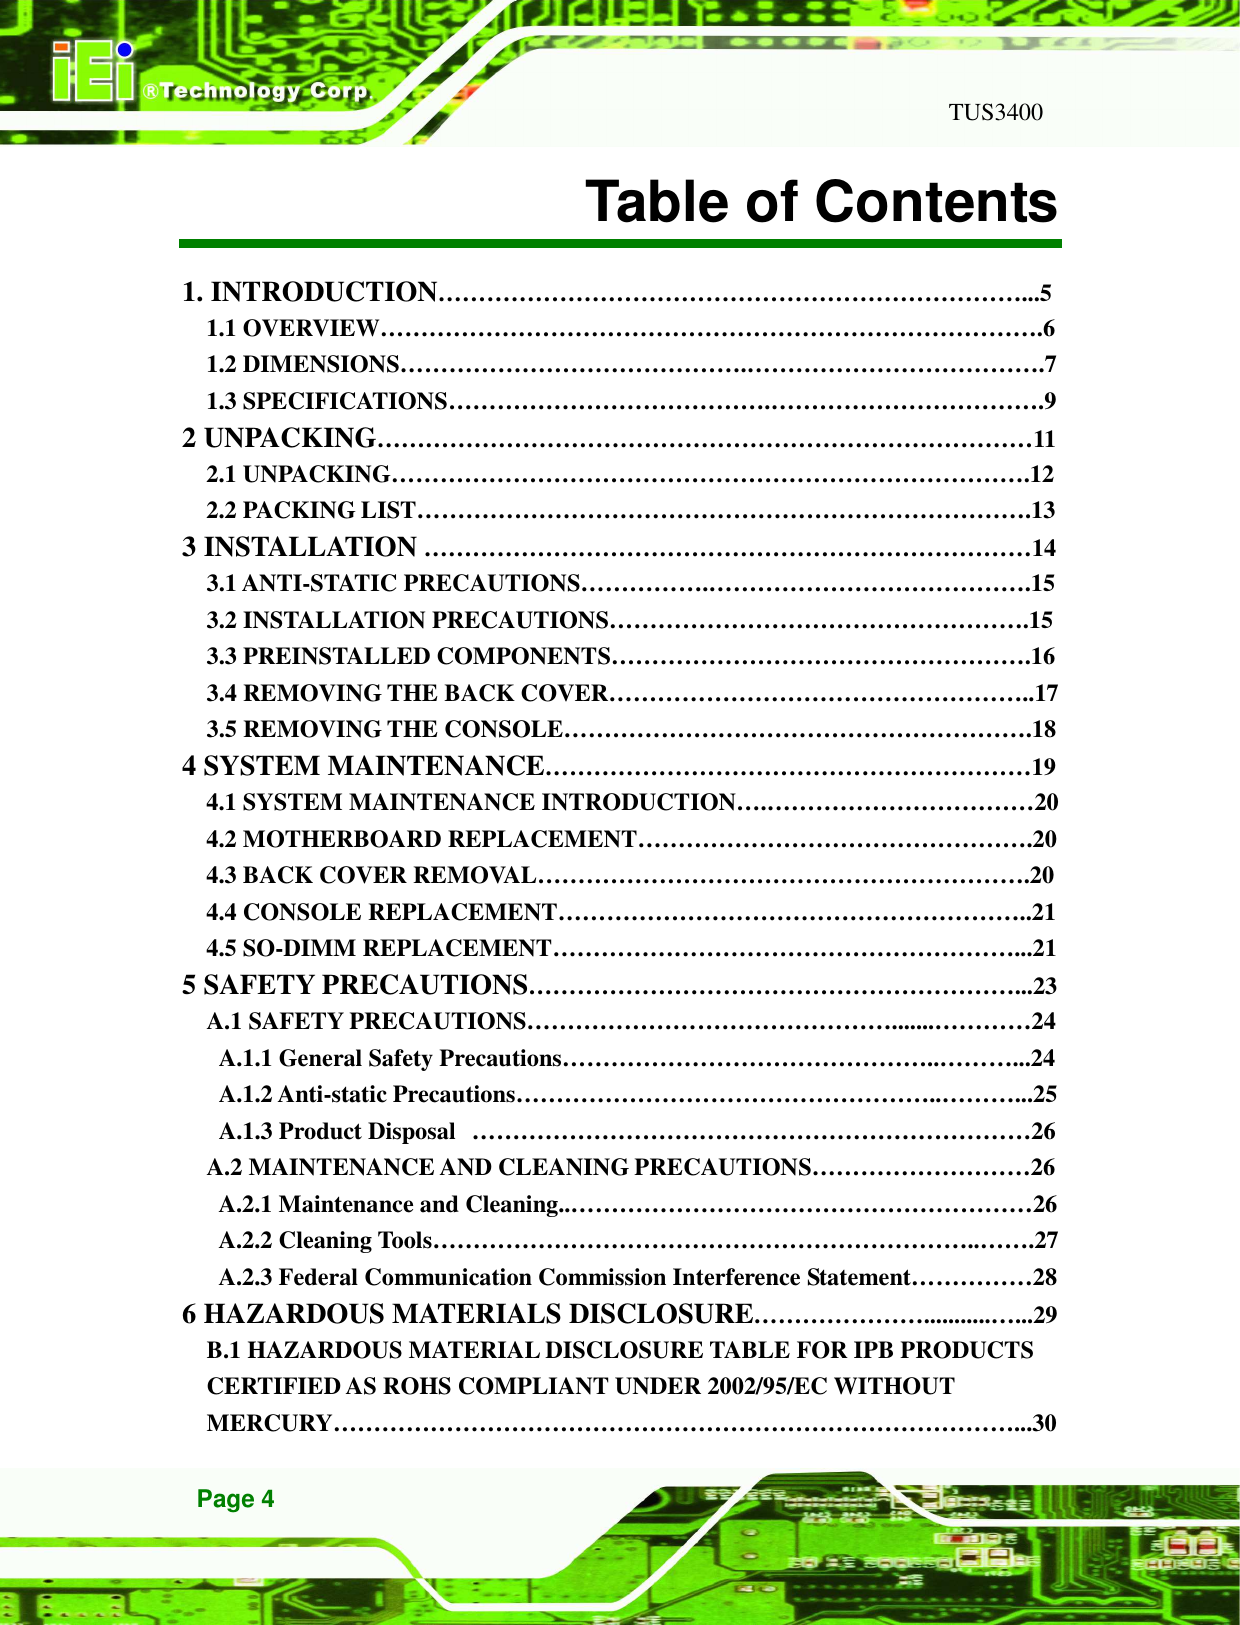   TUS3400 Page 4 Table of Contents 1. INTRODUCTION………………………………………………………………...5 1.1 OVERVIEW……………………………………………………………………….6 1.2 DIMENSIONS…………………………………….……………………………….7 1.3 SPECIFICATIONS………………………………….…………………………….9 2 UNPACKING………………………………………………………………………11 2.1 UNPACKING…………………………………………………………………….12 2.2 PACKING LIST………………………………………………………………….13 3 INSTALLATION …………………………………………………………………14 3.1 ANTI-STATIC PRECAUTIONS…………….………………………………….15 3.2 INSTALLATION PRECAUTIONS…………………………………………….15 3.3 PREINSTALLED COMPONENTS…………………………………………….16 3.4 REMOVING THE BACK COVER……………………………………………..17 3.5 REMOVING THE CONSOLE………………………………………………….18 4 SYSTEM MAINTENANCE……………………………………………………19 4.1 SYSTEM MAINTENANCE INTRODUCTION….……………………………20 4.2 MOTHERBOARD REPLACEMENT………………………………………….20 4.3 BACK COVER REMOVAL…………………………………………………….20 4.4 CONSOLE REPLACEMENT…………………………………………………..21 4.5 SO-DIMM REPLACEMENT…………………………………………………...21 5 SAFETY PRECAUTIONS……………………………………………………...23 A.1 SAFETY PRECAUTIONS……………………………………….......…………24 A.1.1 General Safety Precautions………………………………………..………...24 A.1.2 Anti-static Precautions……………………………………………..………...25 A.1.3 Product Disposal  ……………………………………………………………26 A.2 MAINTENANCE AND CLEANING PRECAUTIONS………………………26 A.2.1 Maintenance and Cleaning..…………………………………………………26 A.2.2 Cleaning Tools…………………………………………………………..…….27 A.2.3 Federal Communication Commission Interference Statement……………28 6 HAZARDOUS MATERIALS DISCLOSURE…………………...........…...29 B.1 HAZARDOUS MATERIAL DISCLOSURE TABLE FOR IPB PRODUCTS CERTIFIED AS ROHS COMPLIANT UNDER 2002/95/EC WITHOUT MERCURY…………………………………………………………………………...30 